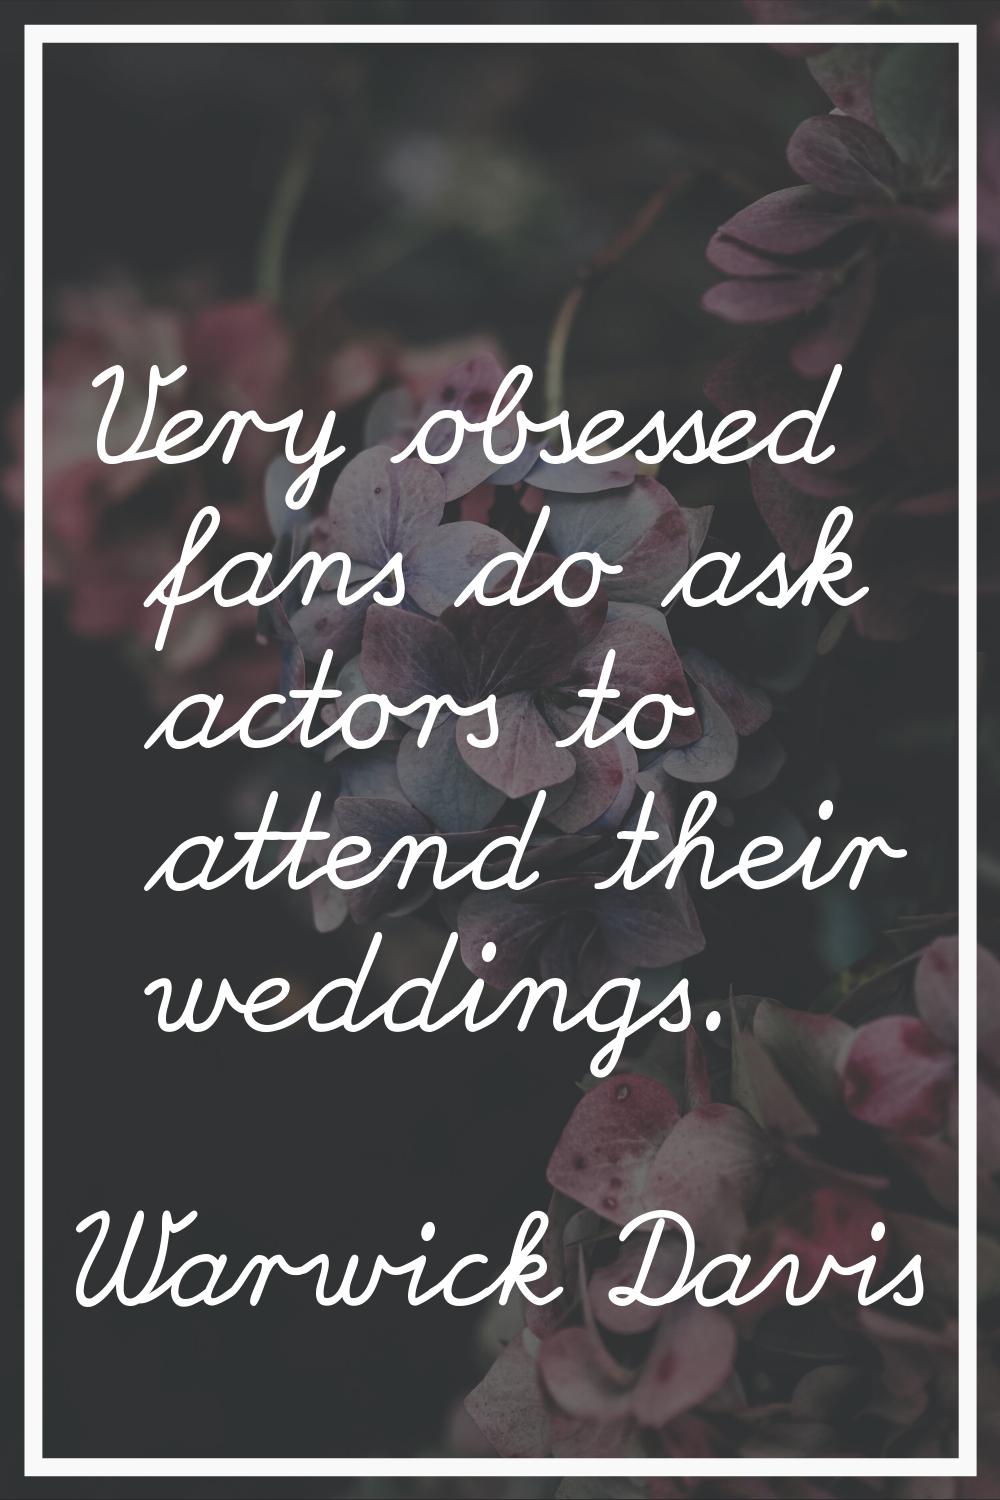 Very obsessed fans do ask actors to attend their weddings.